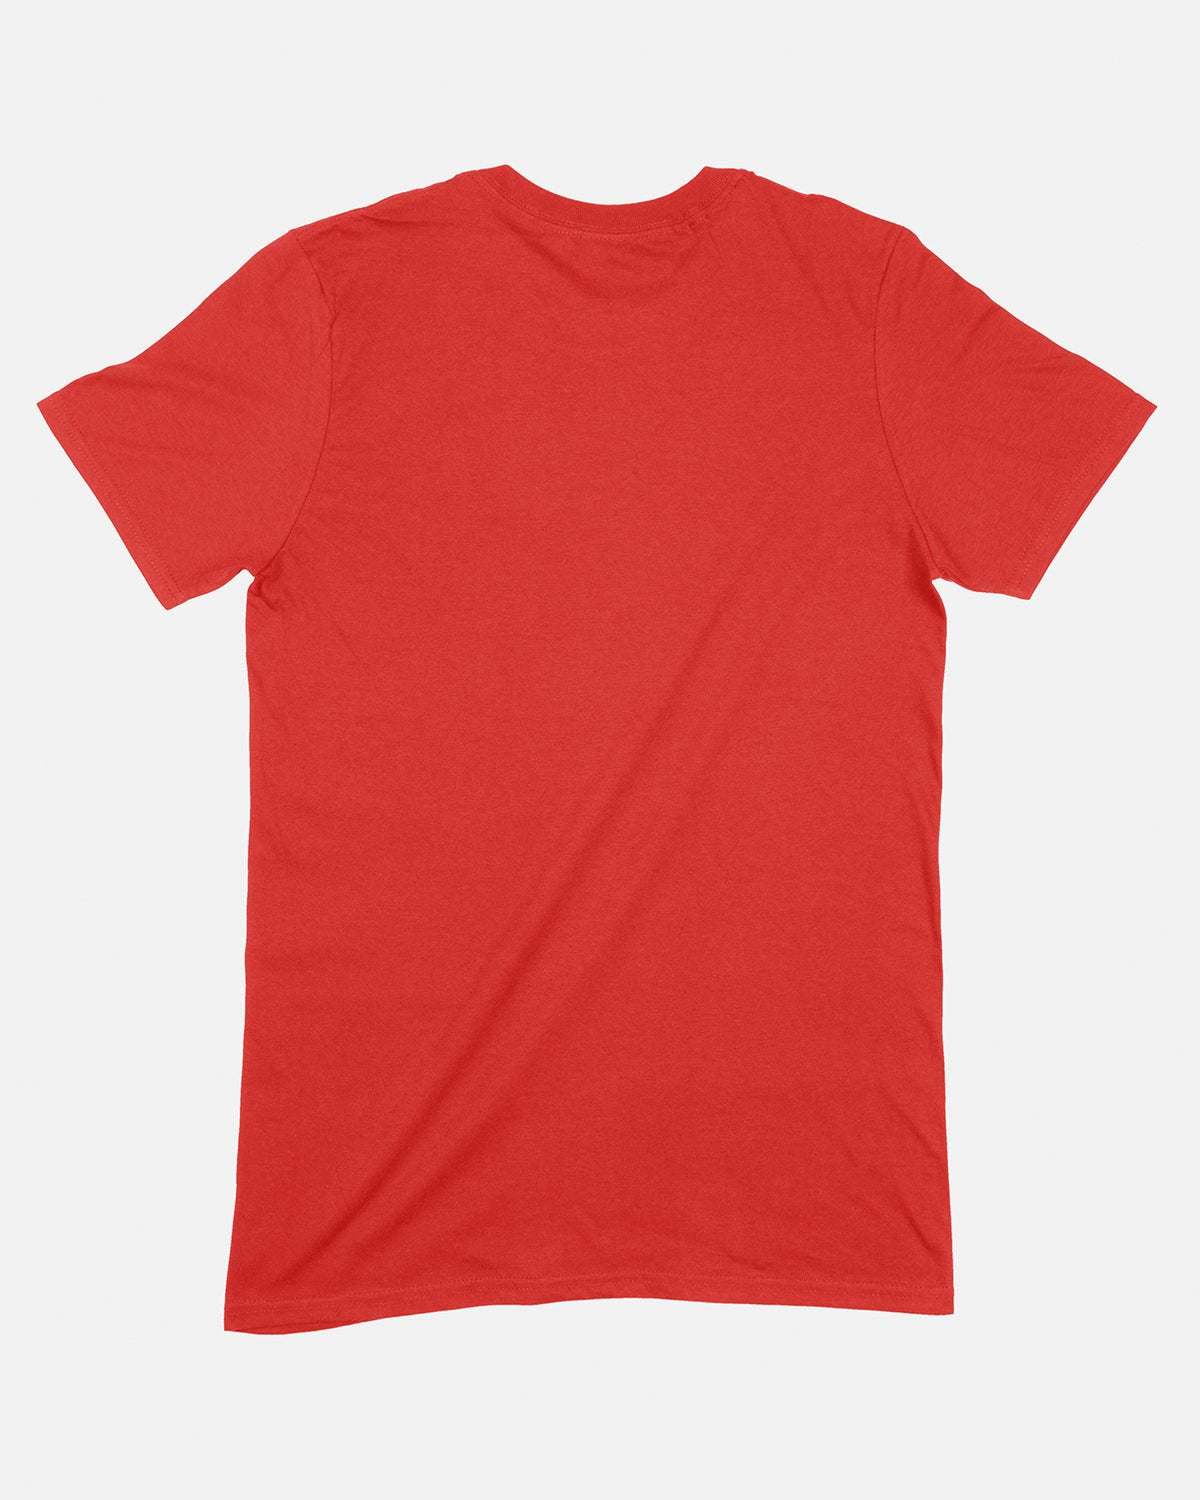 NFFC Classic Red T-Shirt - Nottingham Forest FC